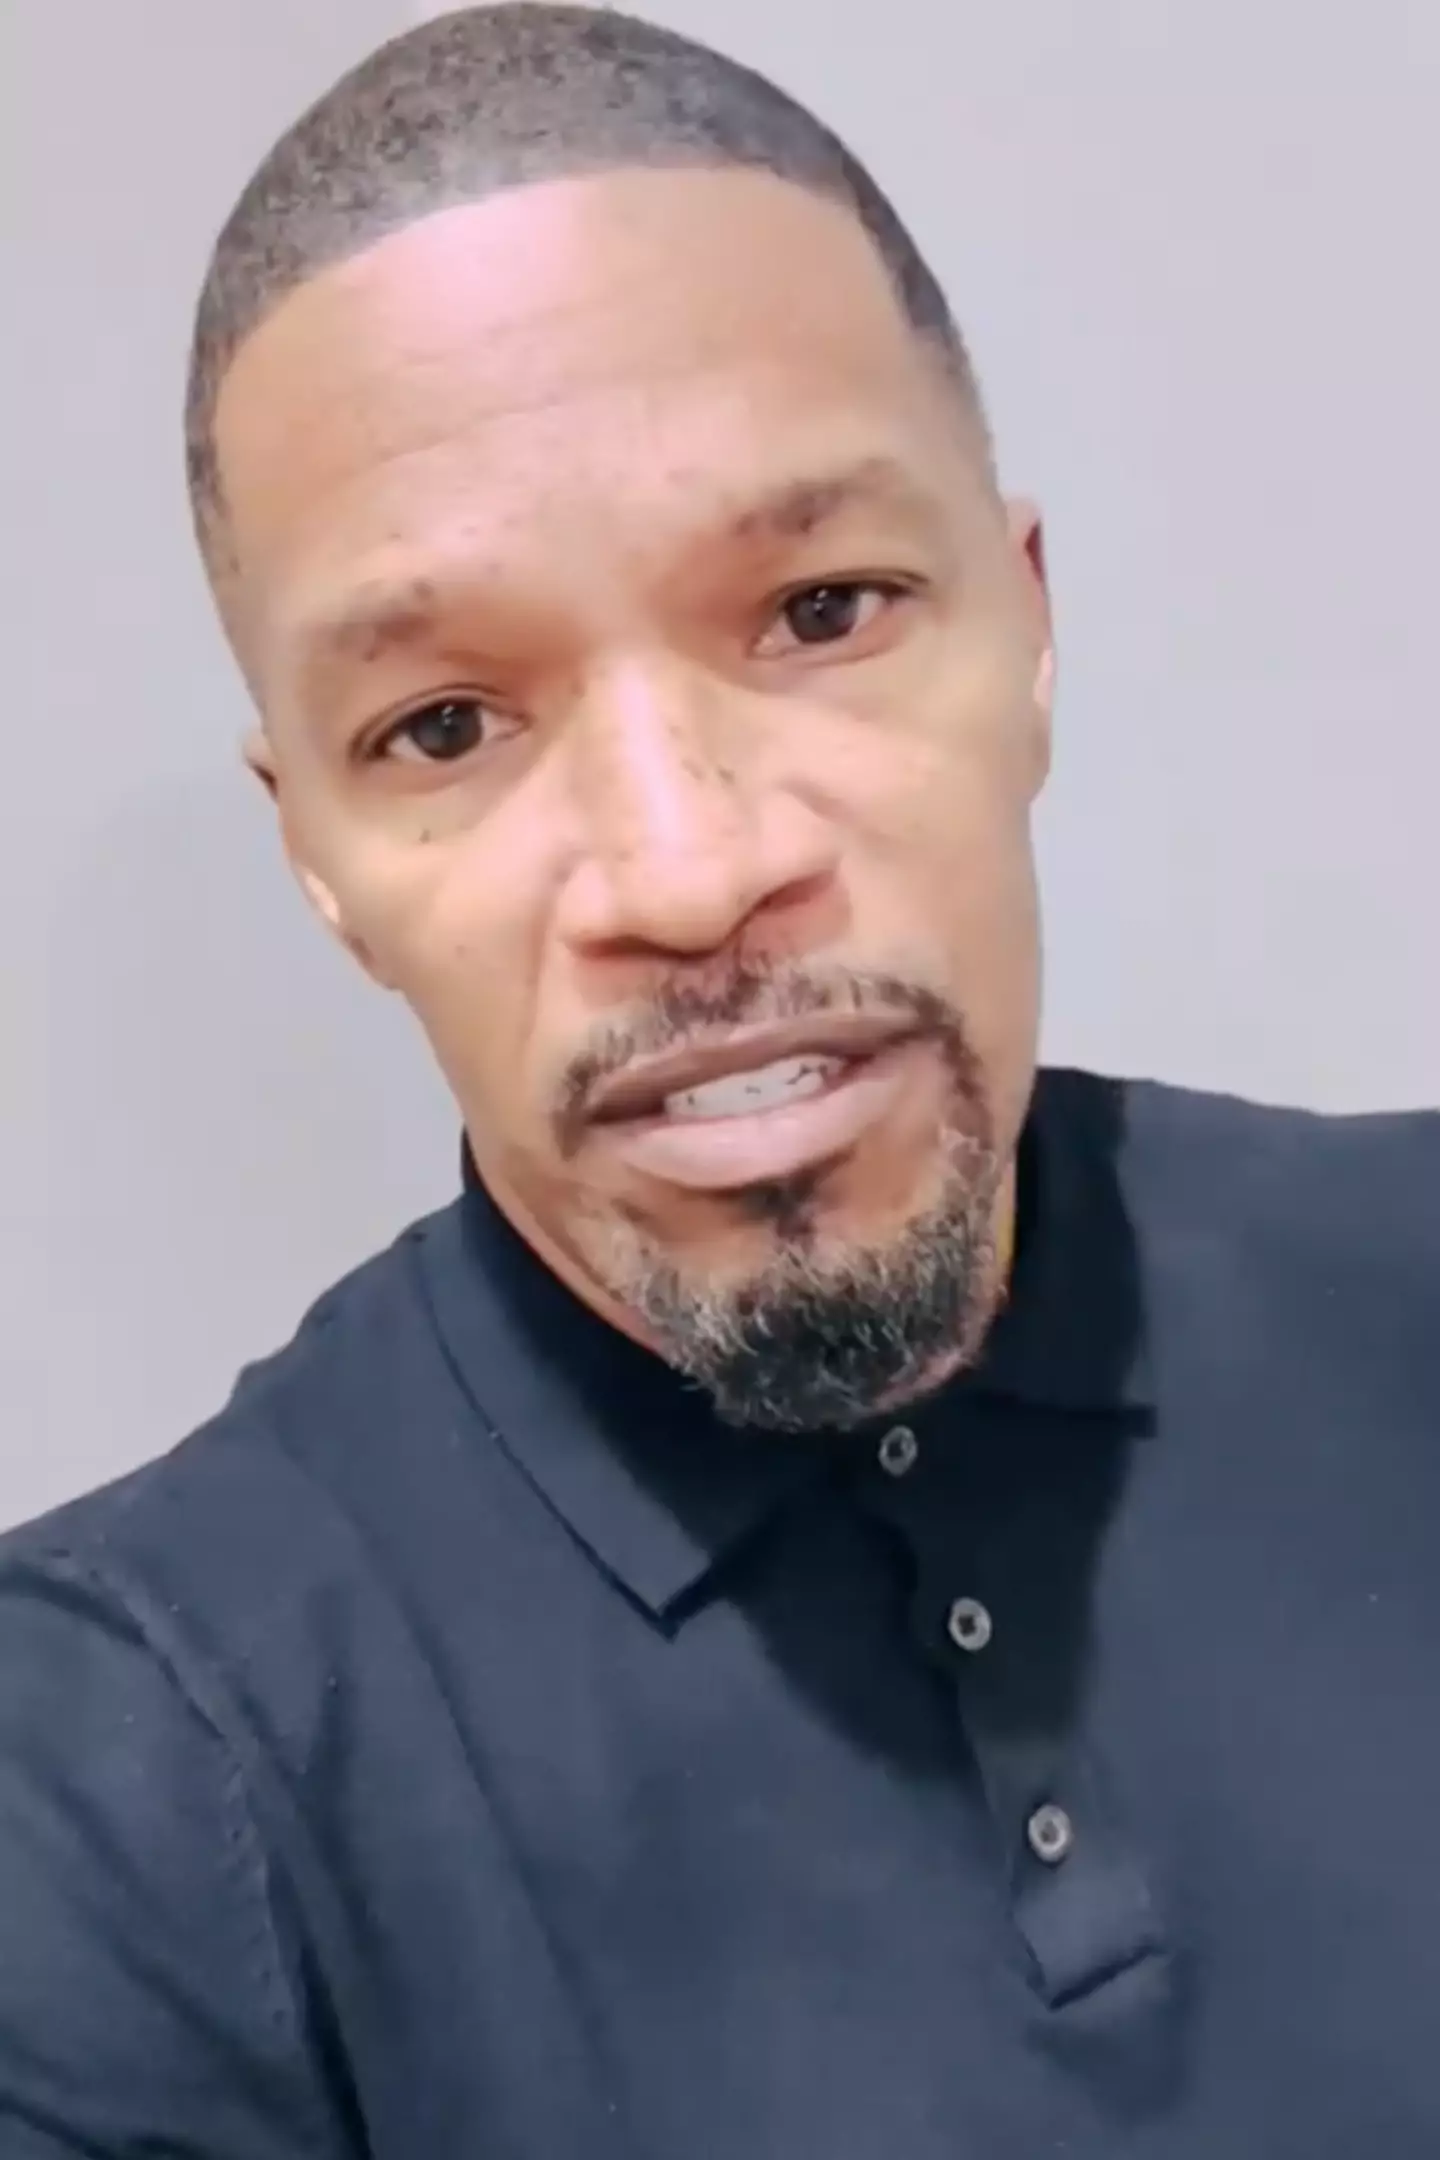 Jamie Foxx spoke openly about his ill-health.